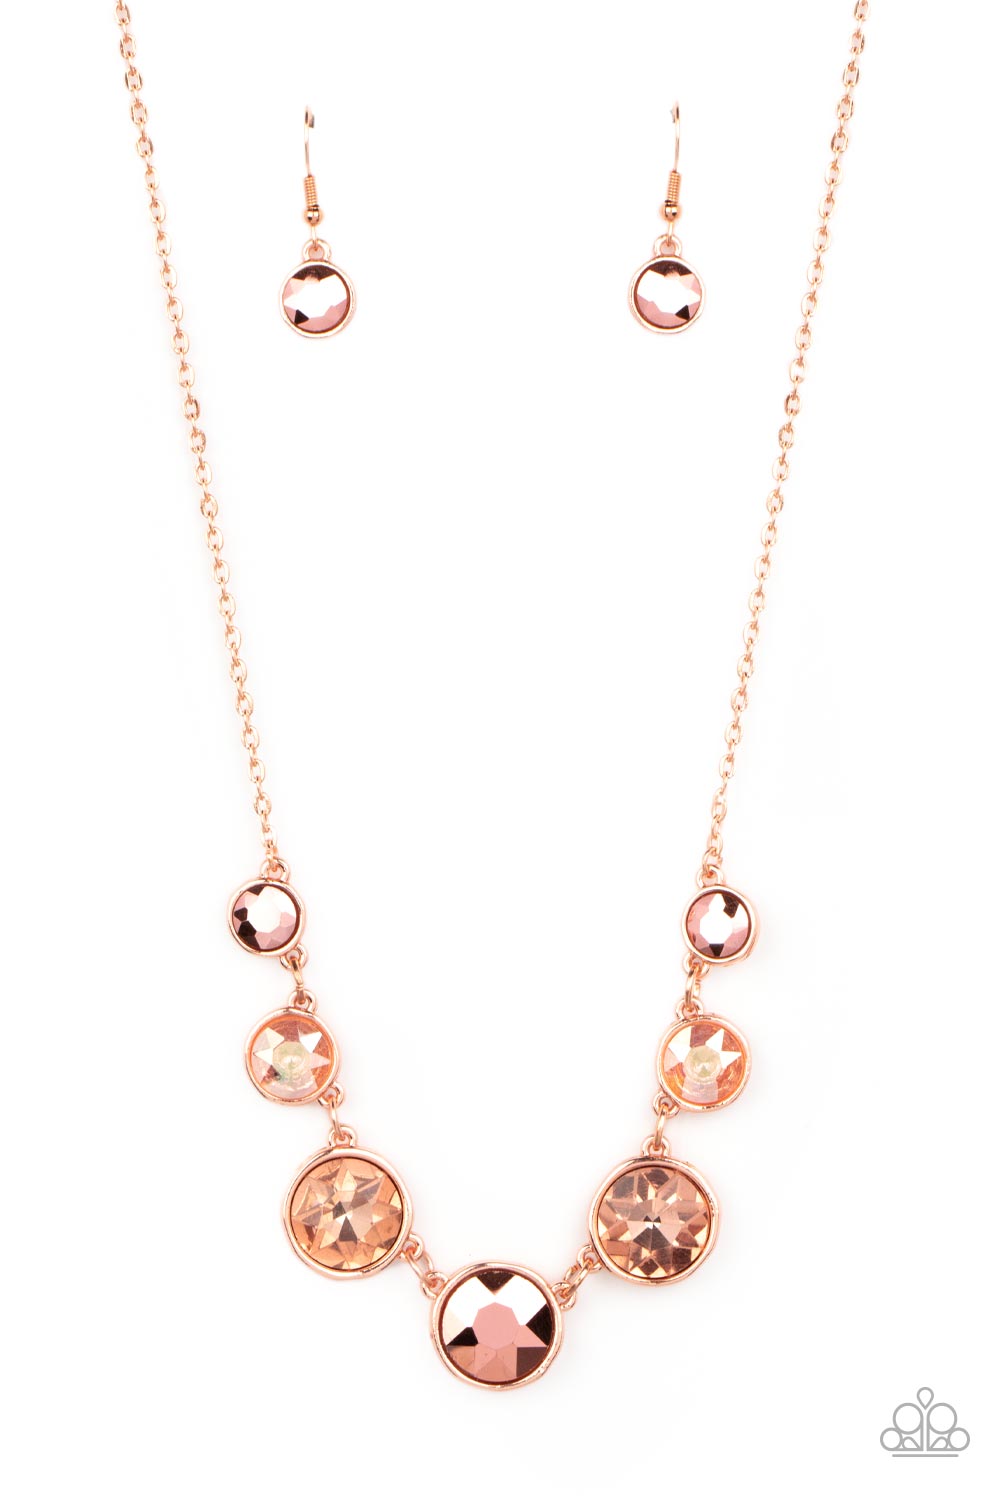 Pampered Powerhouse - Copper Necklace - Paparazzi Accessories - Paparazzi Accessories 